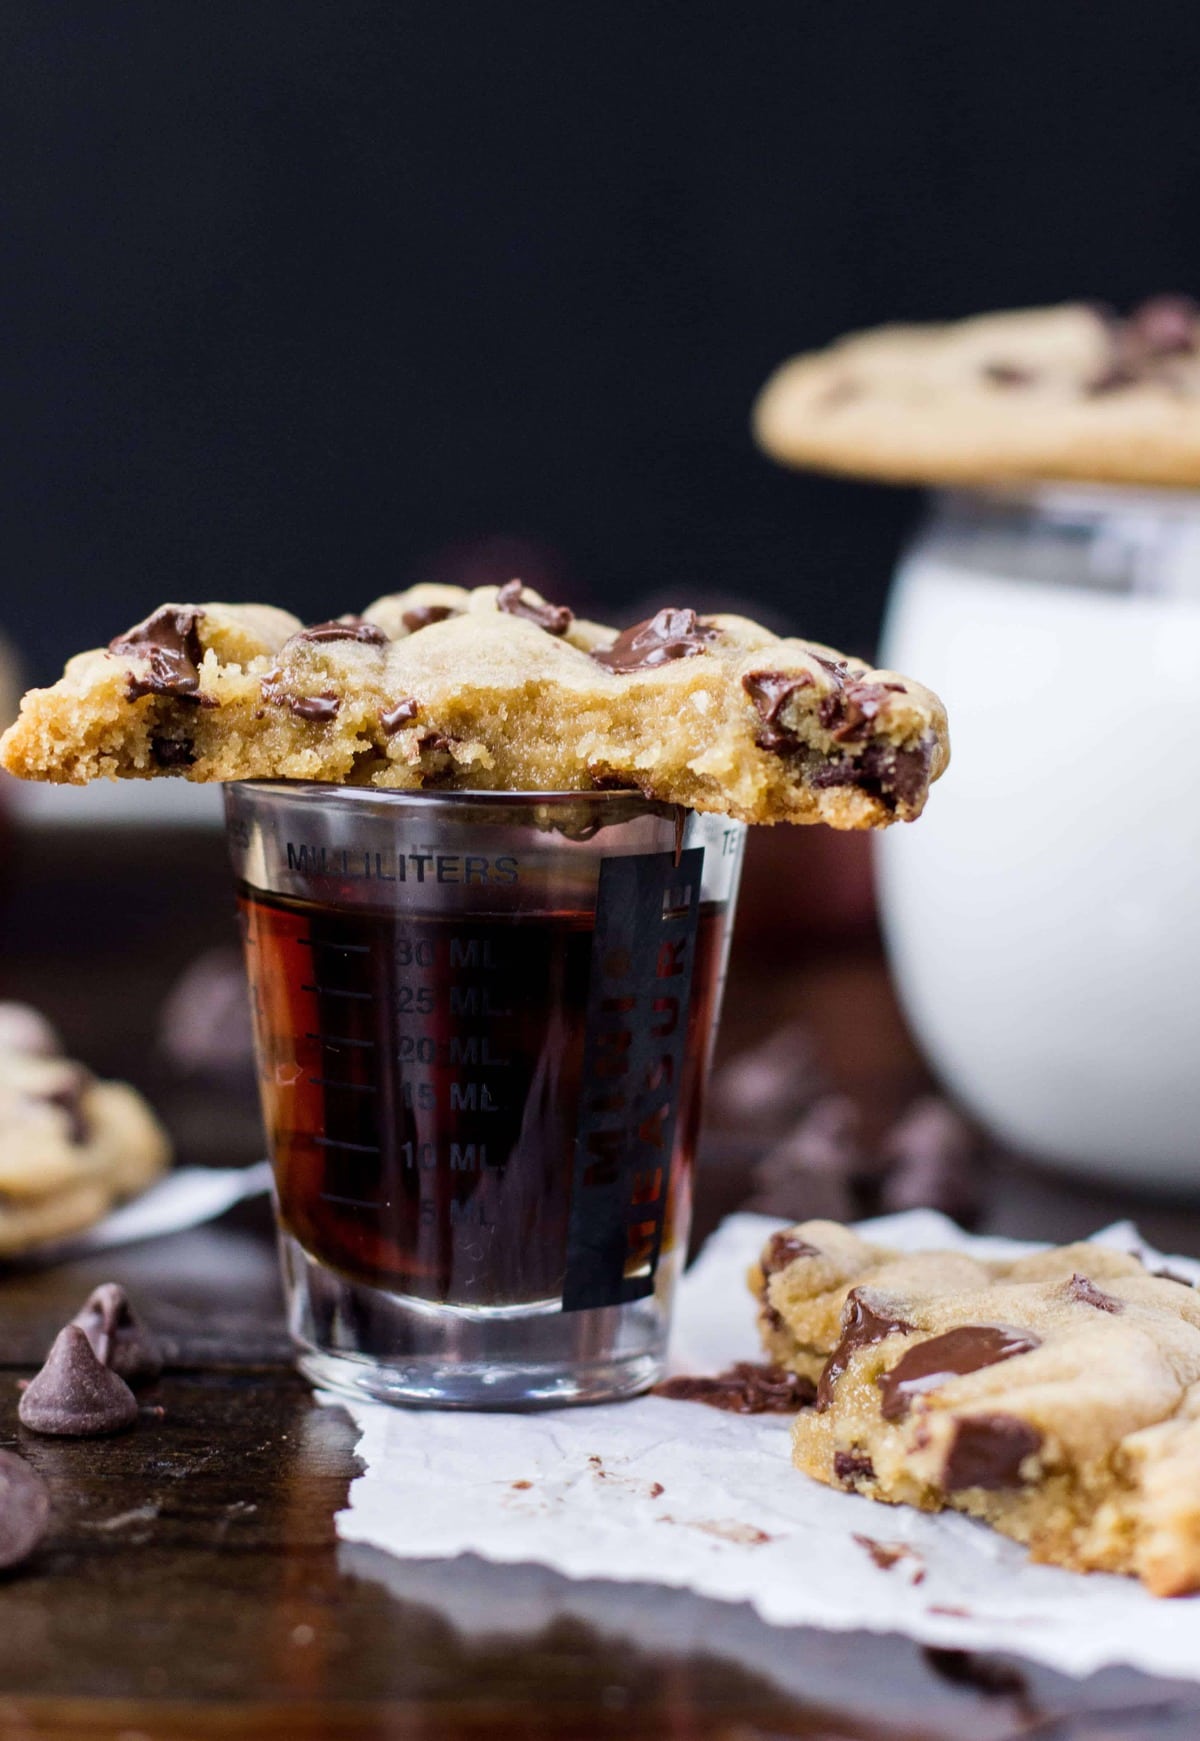 chocolate chip cookie broken in half to show the inside, perched on a shotglass filled with the secret ingredient (maple syrup)